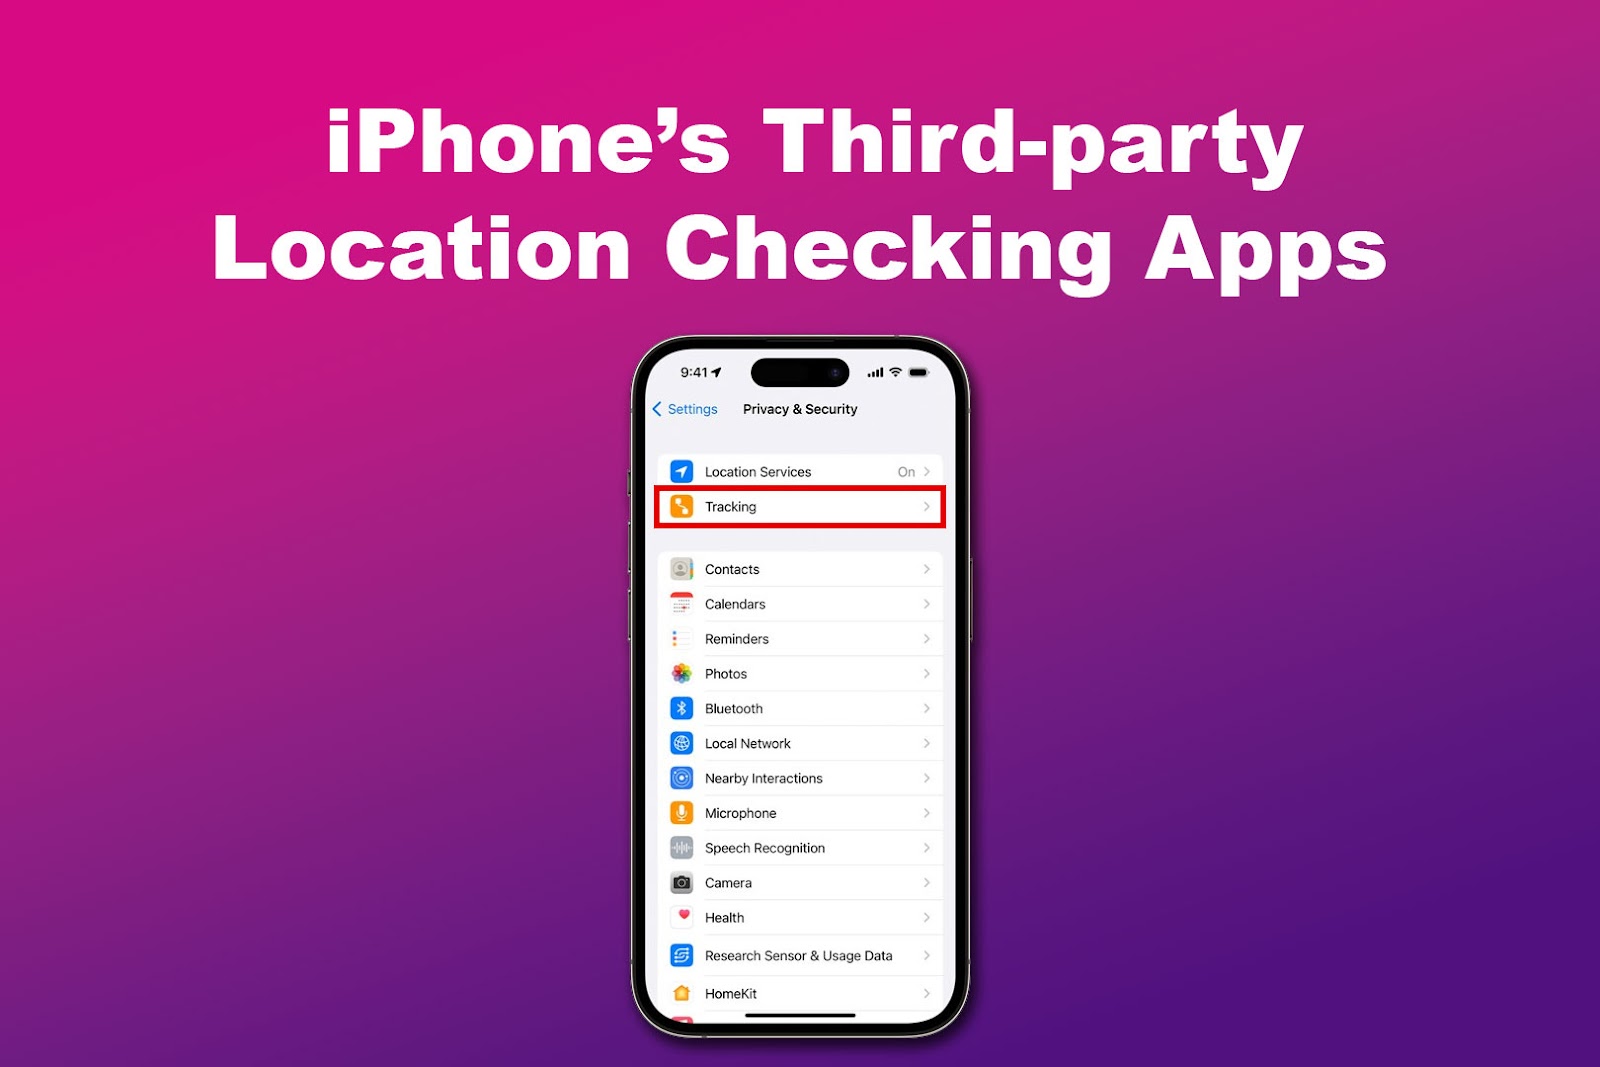 iPhone’s Third-party Location Checking Apps